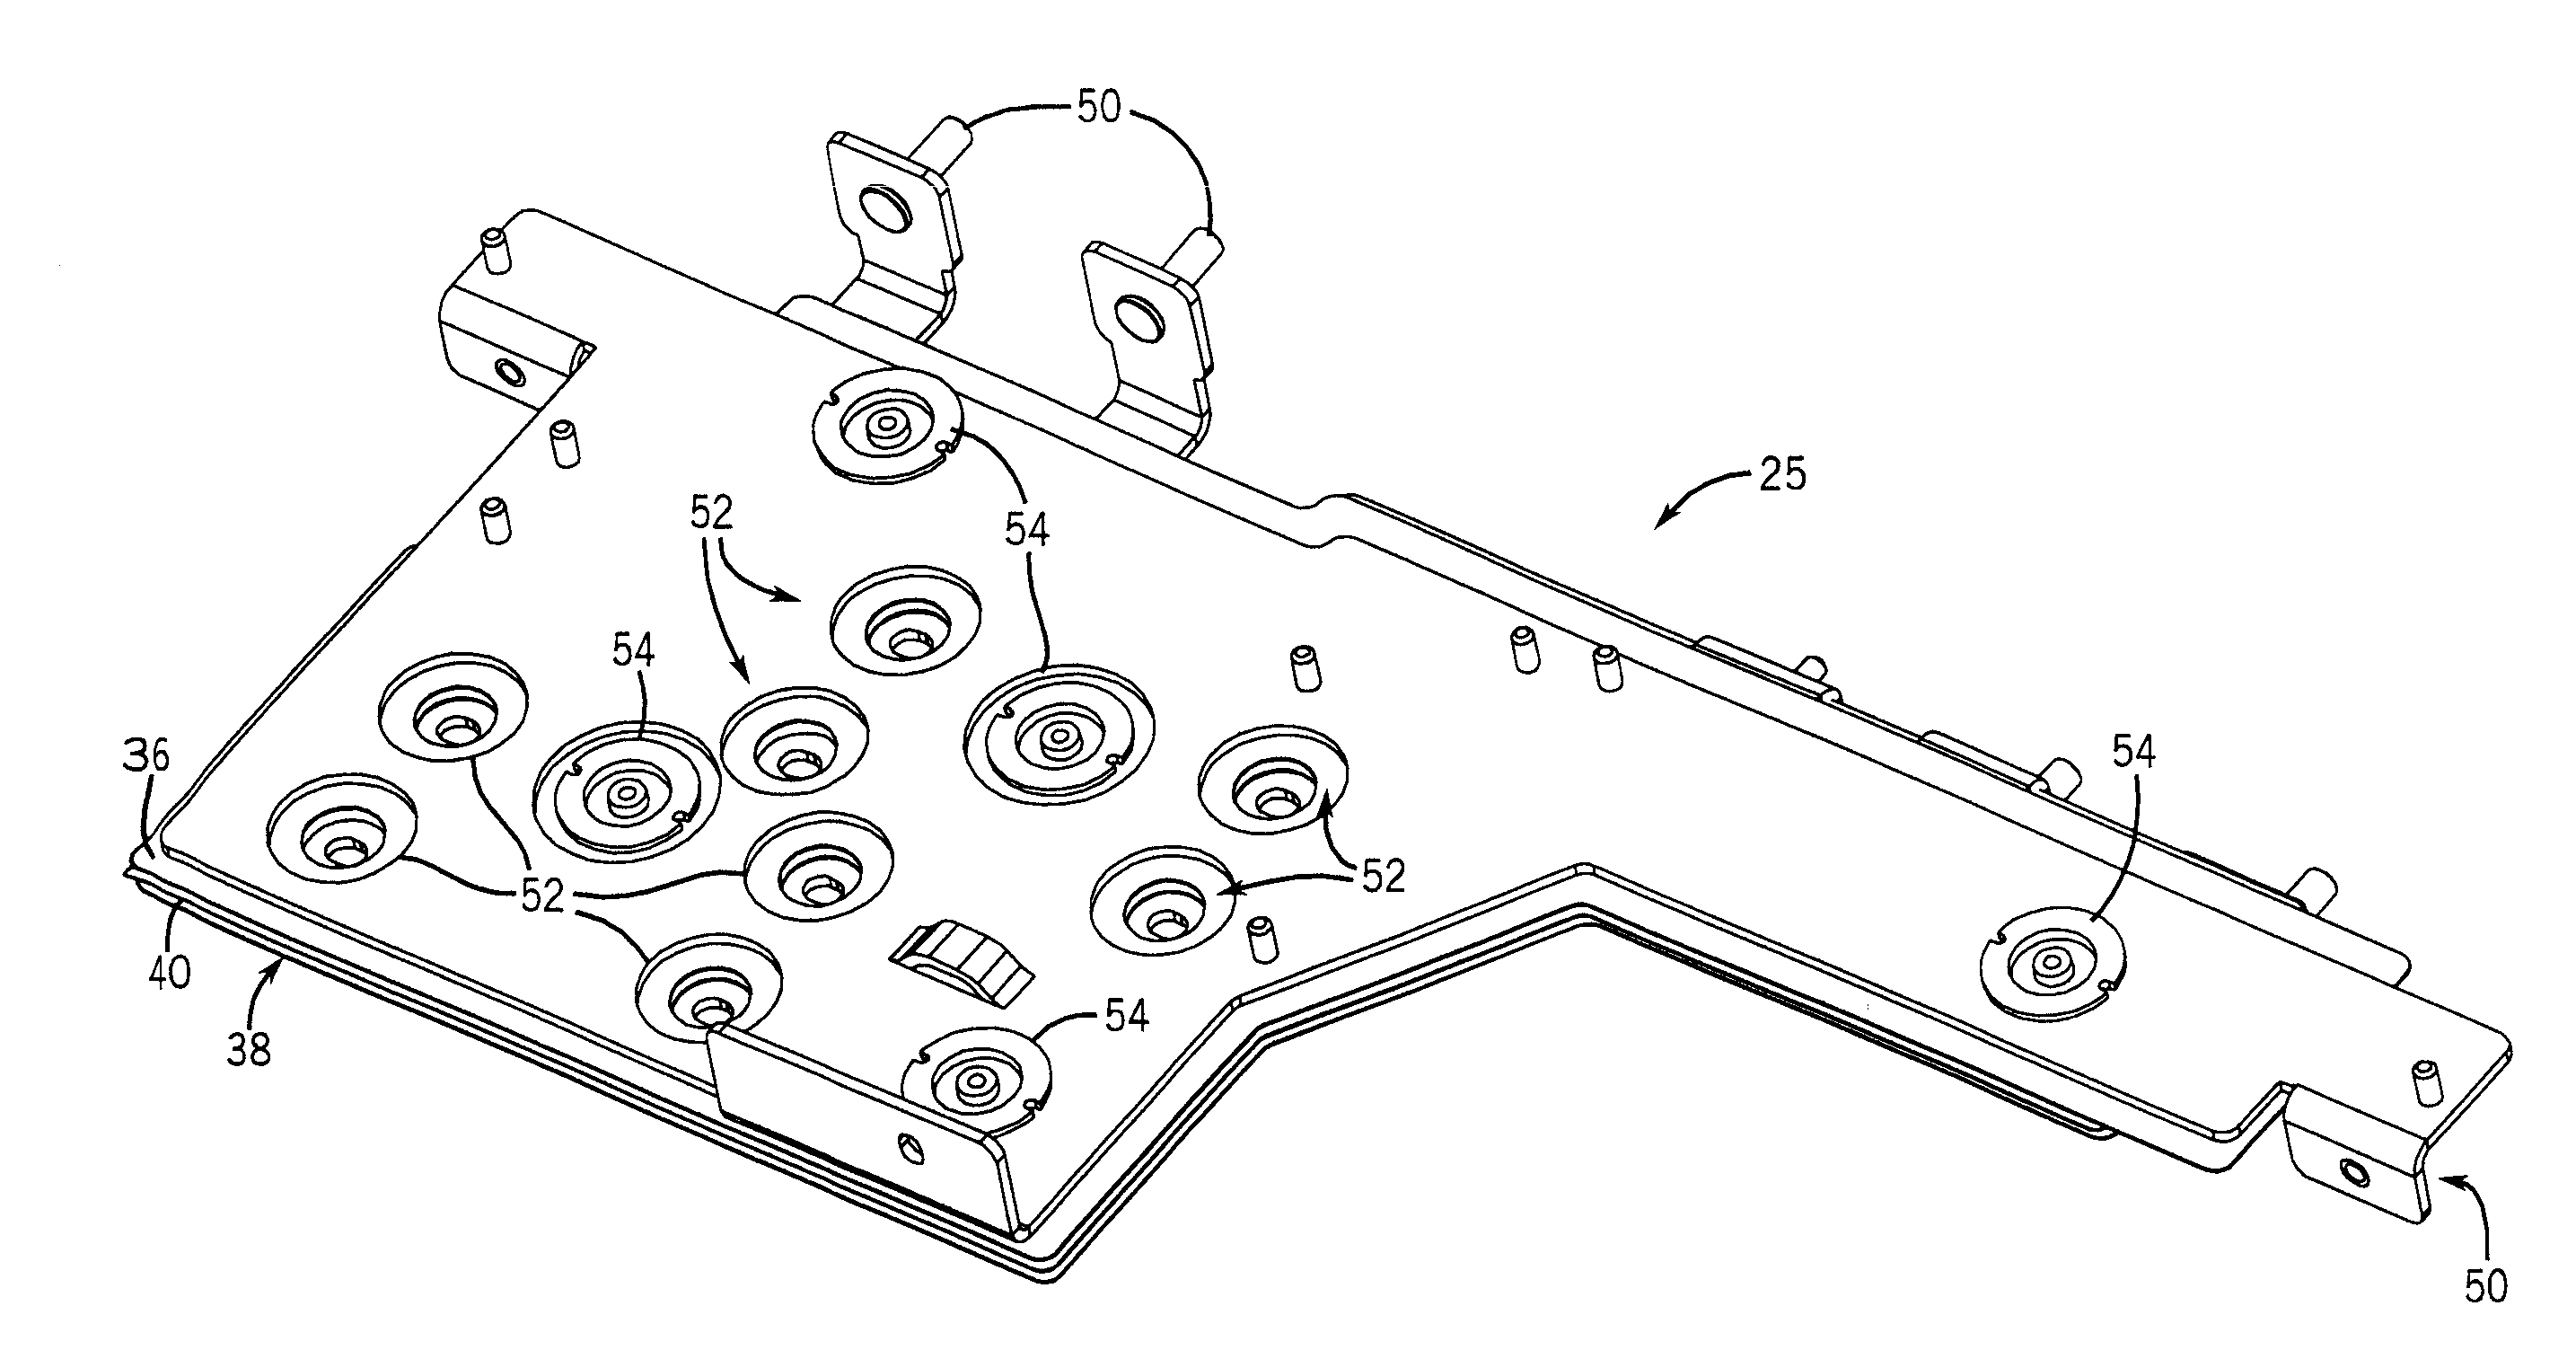 Adhesive-Less DC Bus System and Method for Manufacturing